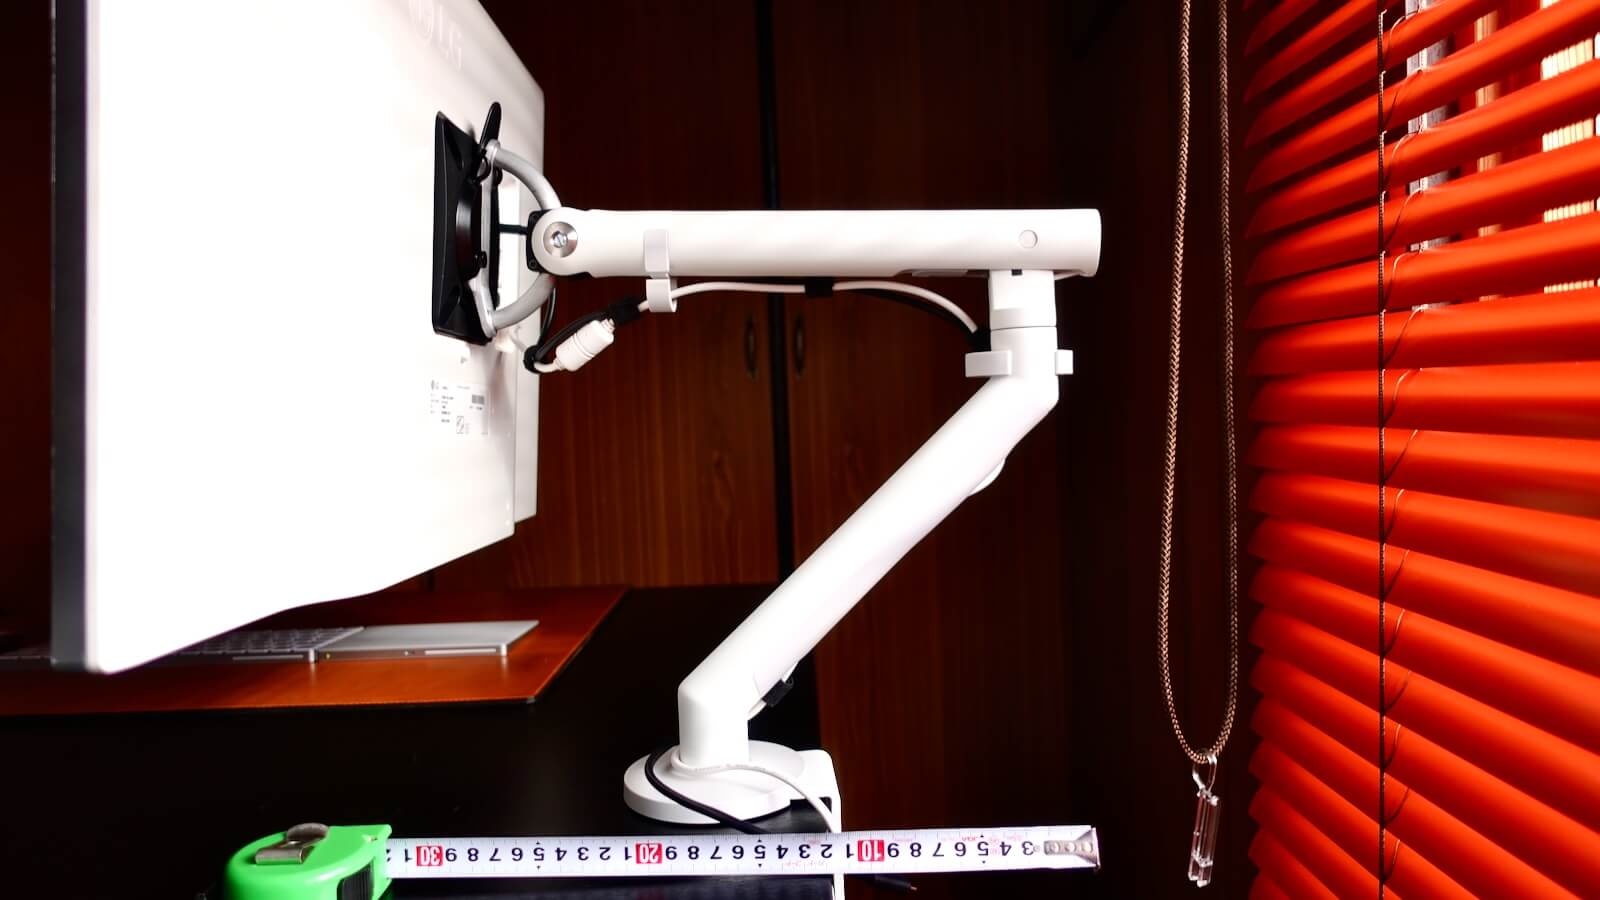 Herman Miller Flo Monitor Arm Arm
11.5 cm overhangs the table